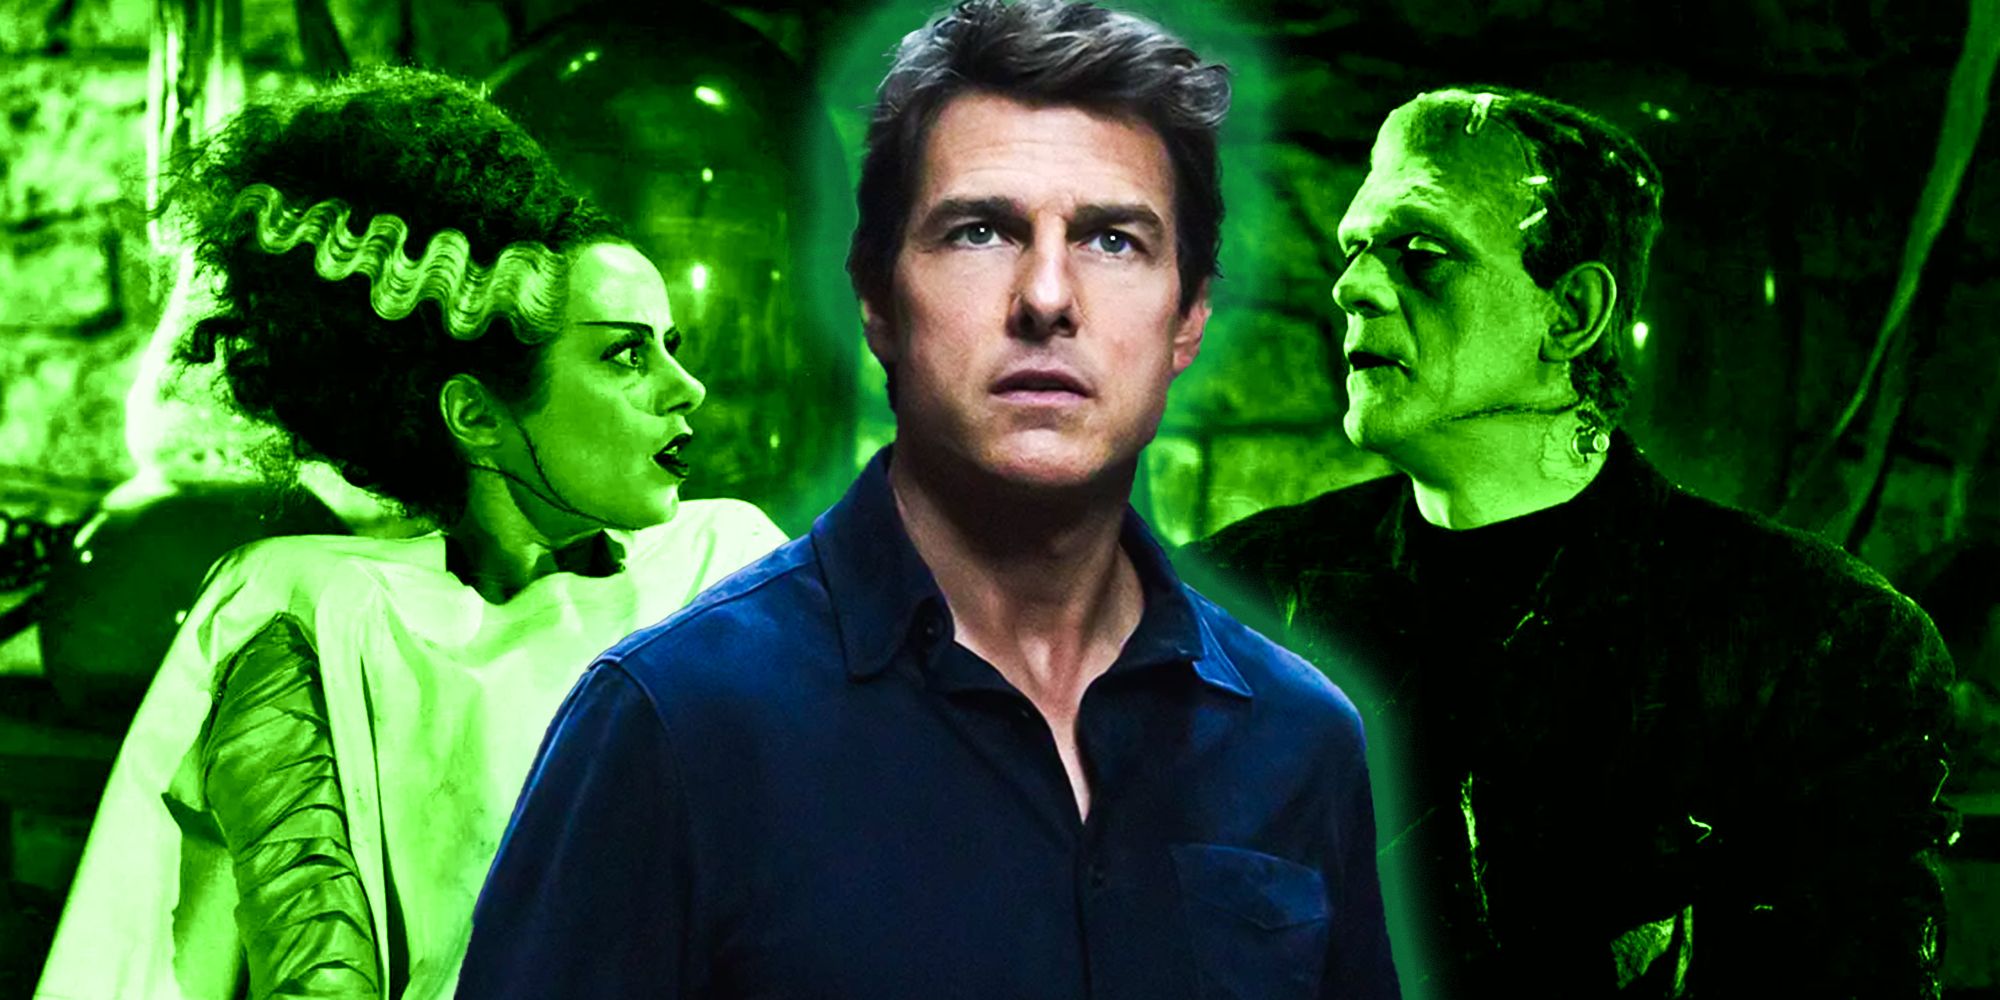 Tom Cruise in The Mummy remake with Bride of Frankenstein characters